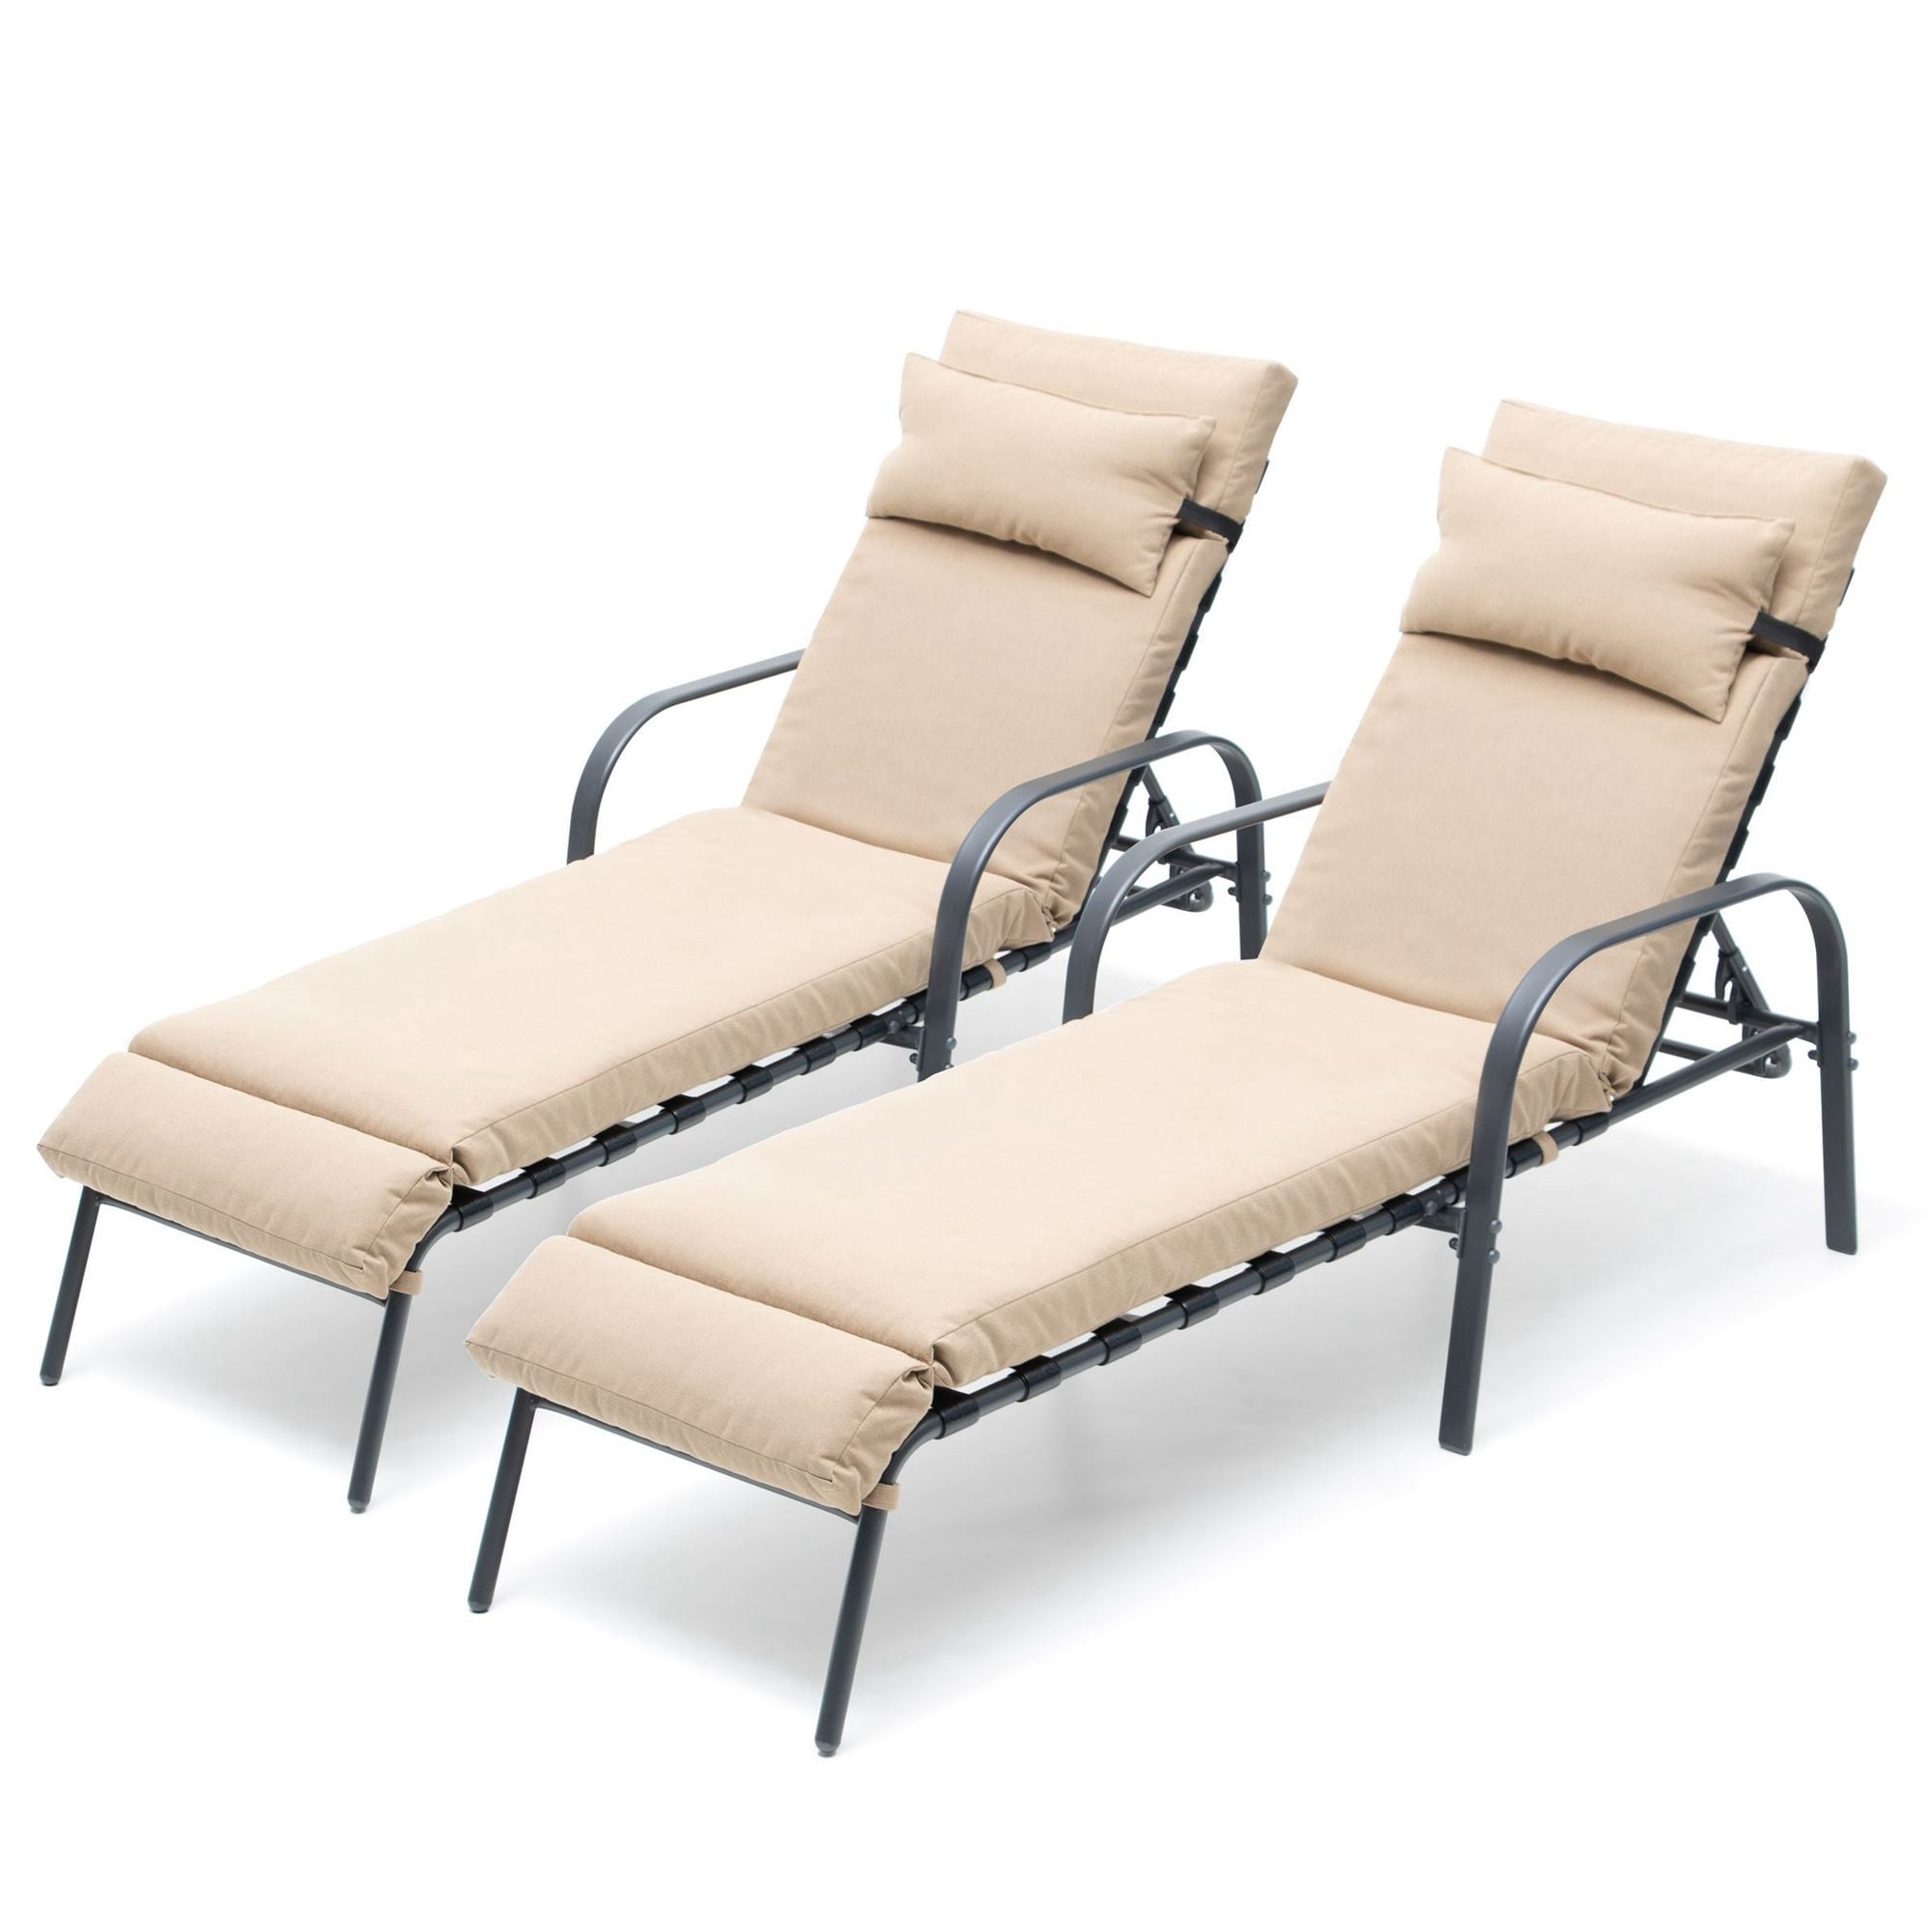 Vredhom Outdoor Adjustable Chaise Lounge With Cushion And Pillow (set Of 2) - Set Of 2